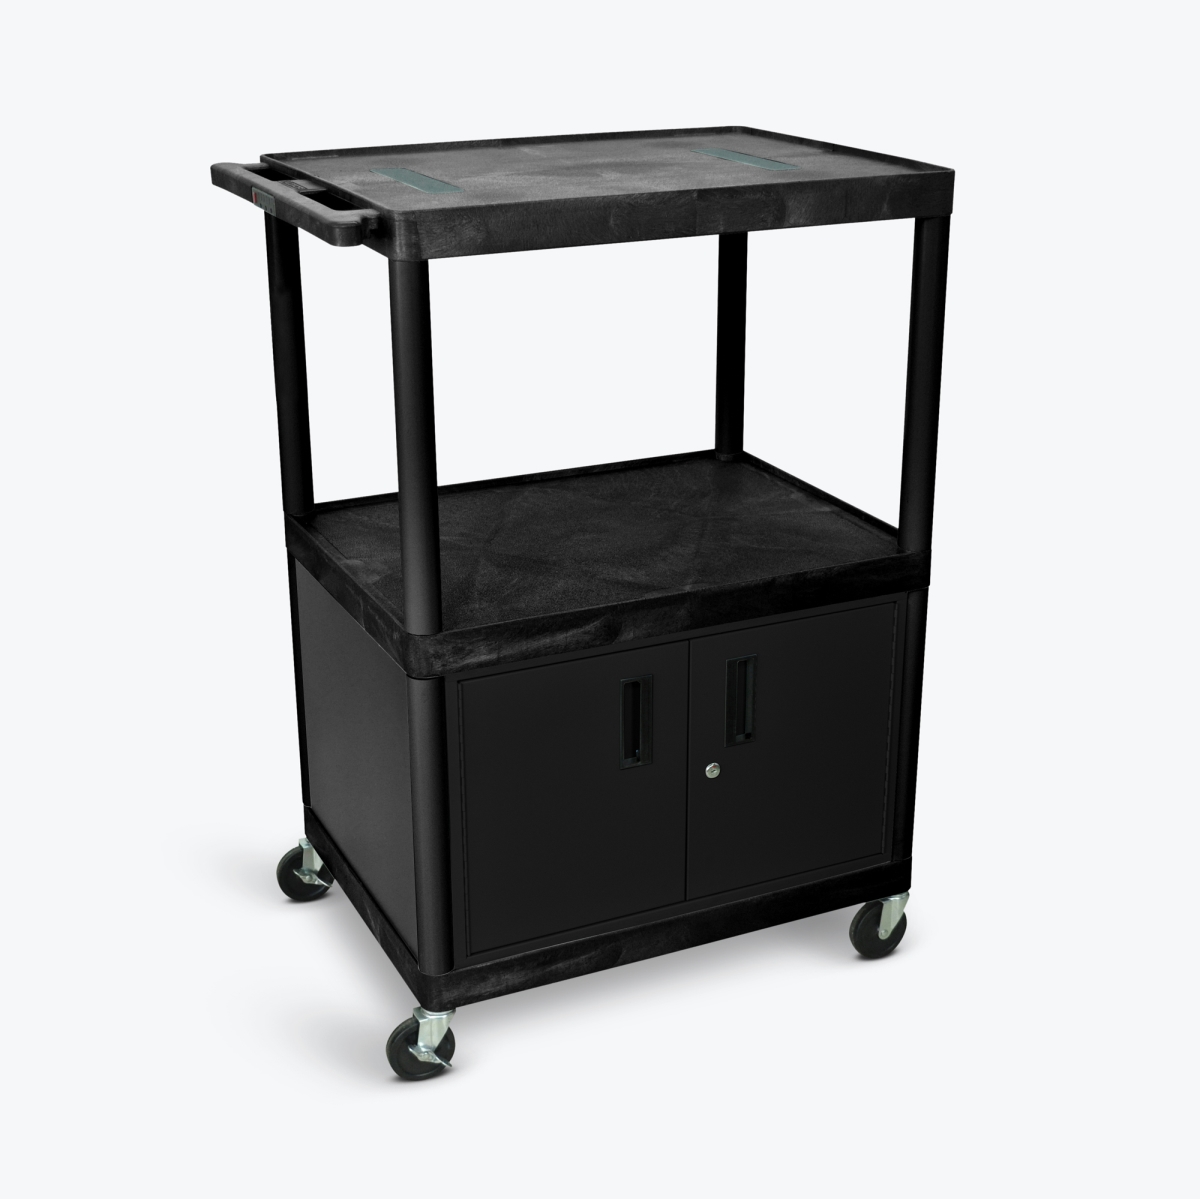 Picture of Luxor LE48C-B 48 in. 3 Shelves AV Cart with Cabinet, Black